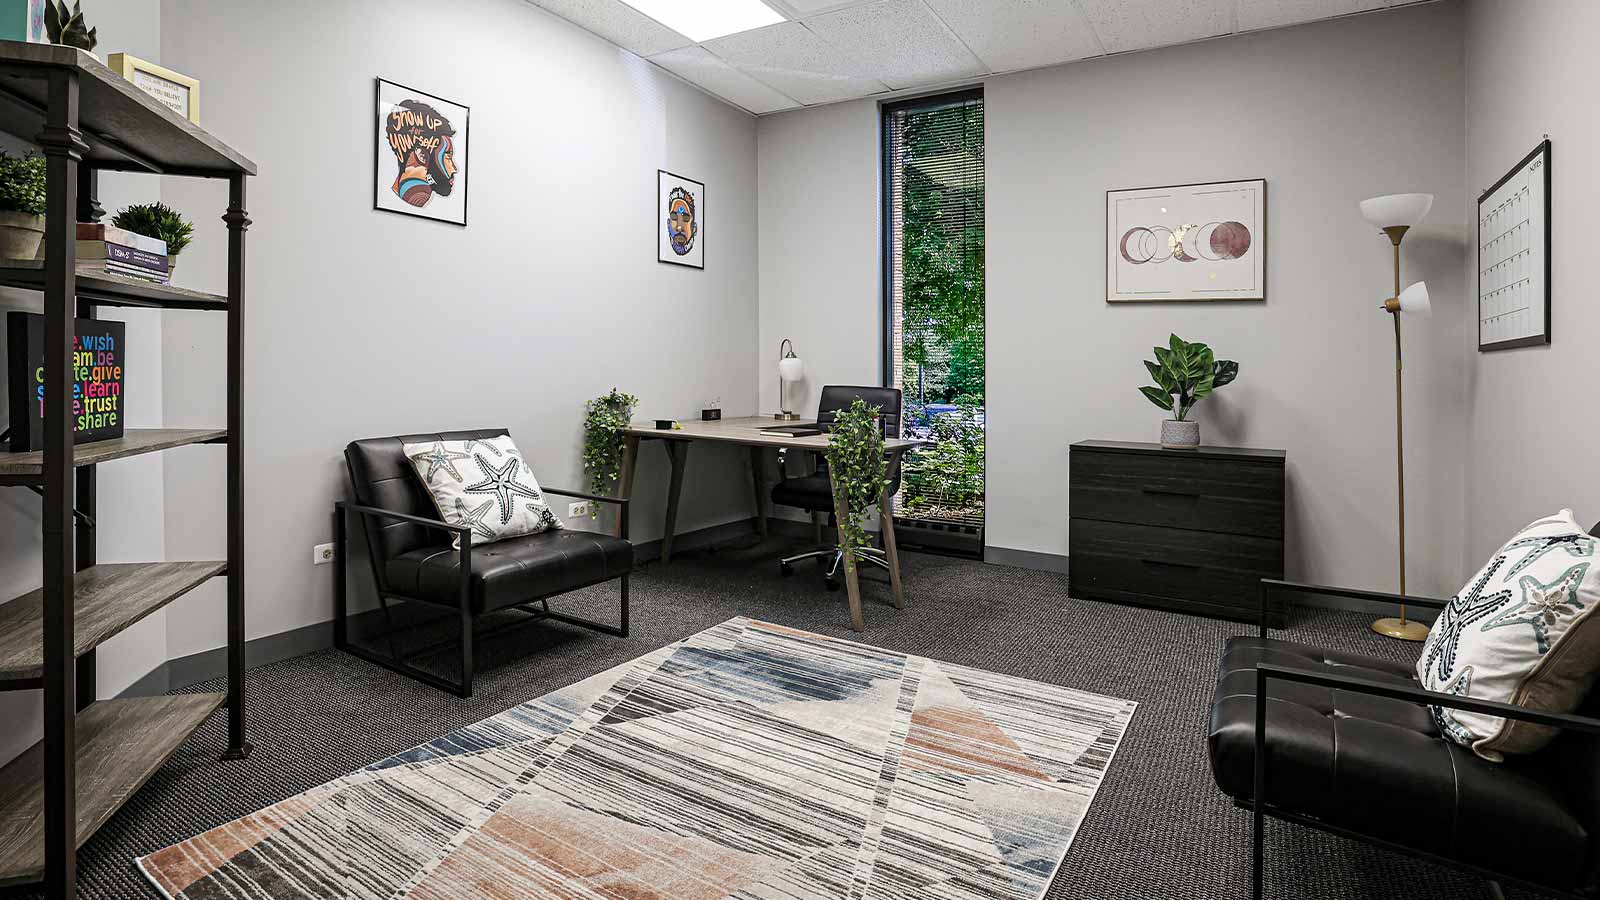 An inviting office space with a desk, comfortable seating, and decorative wall art.